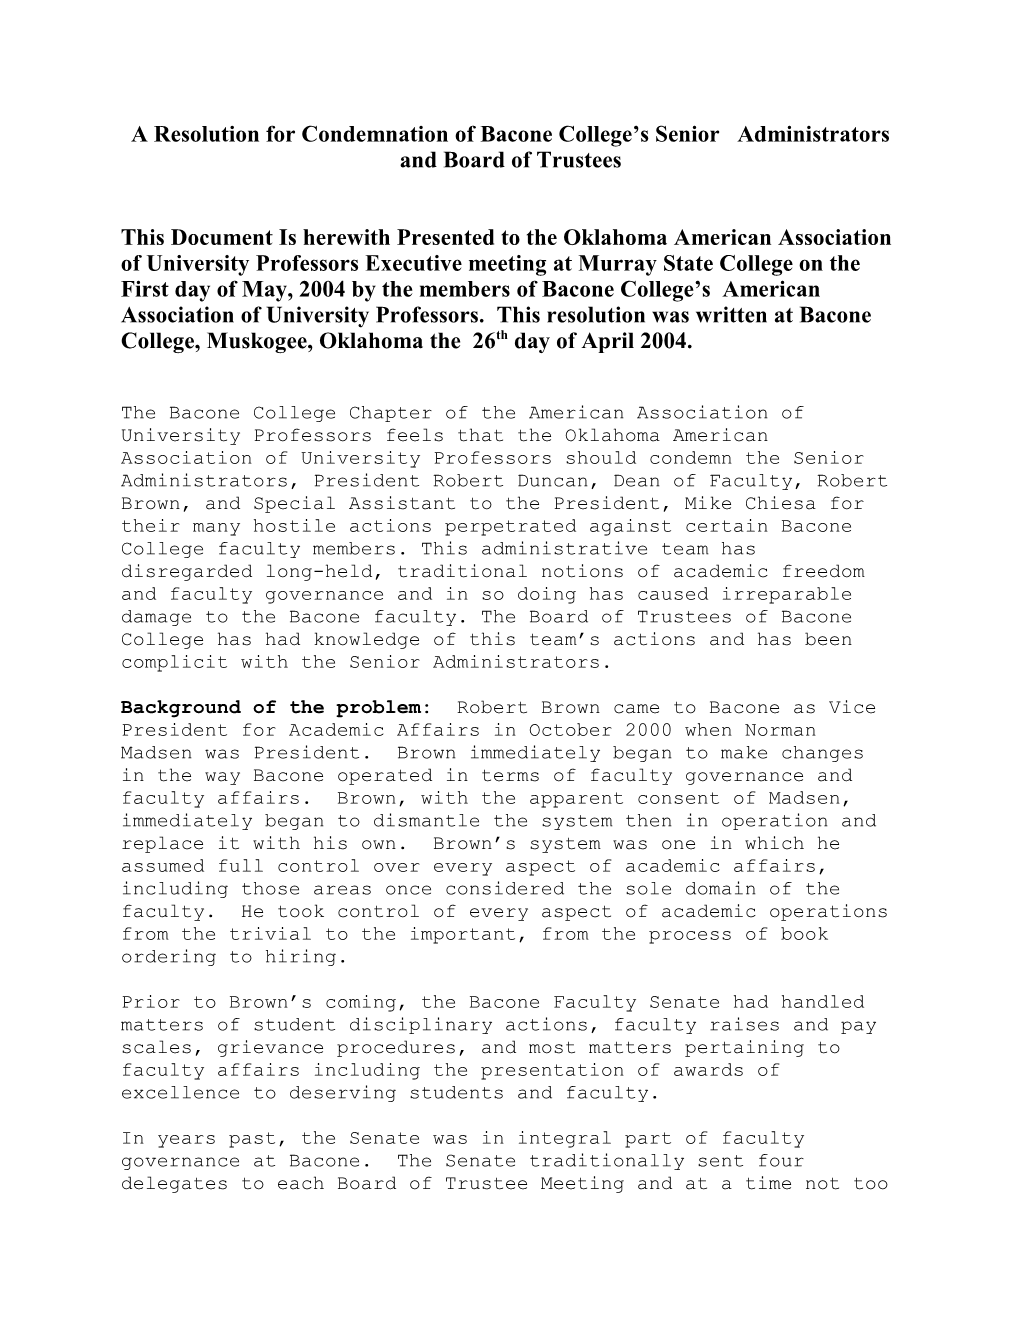 A Resolution for Condemnation of Bacone College S Senior Administrators and Board of Trustees